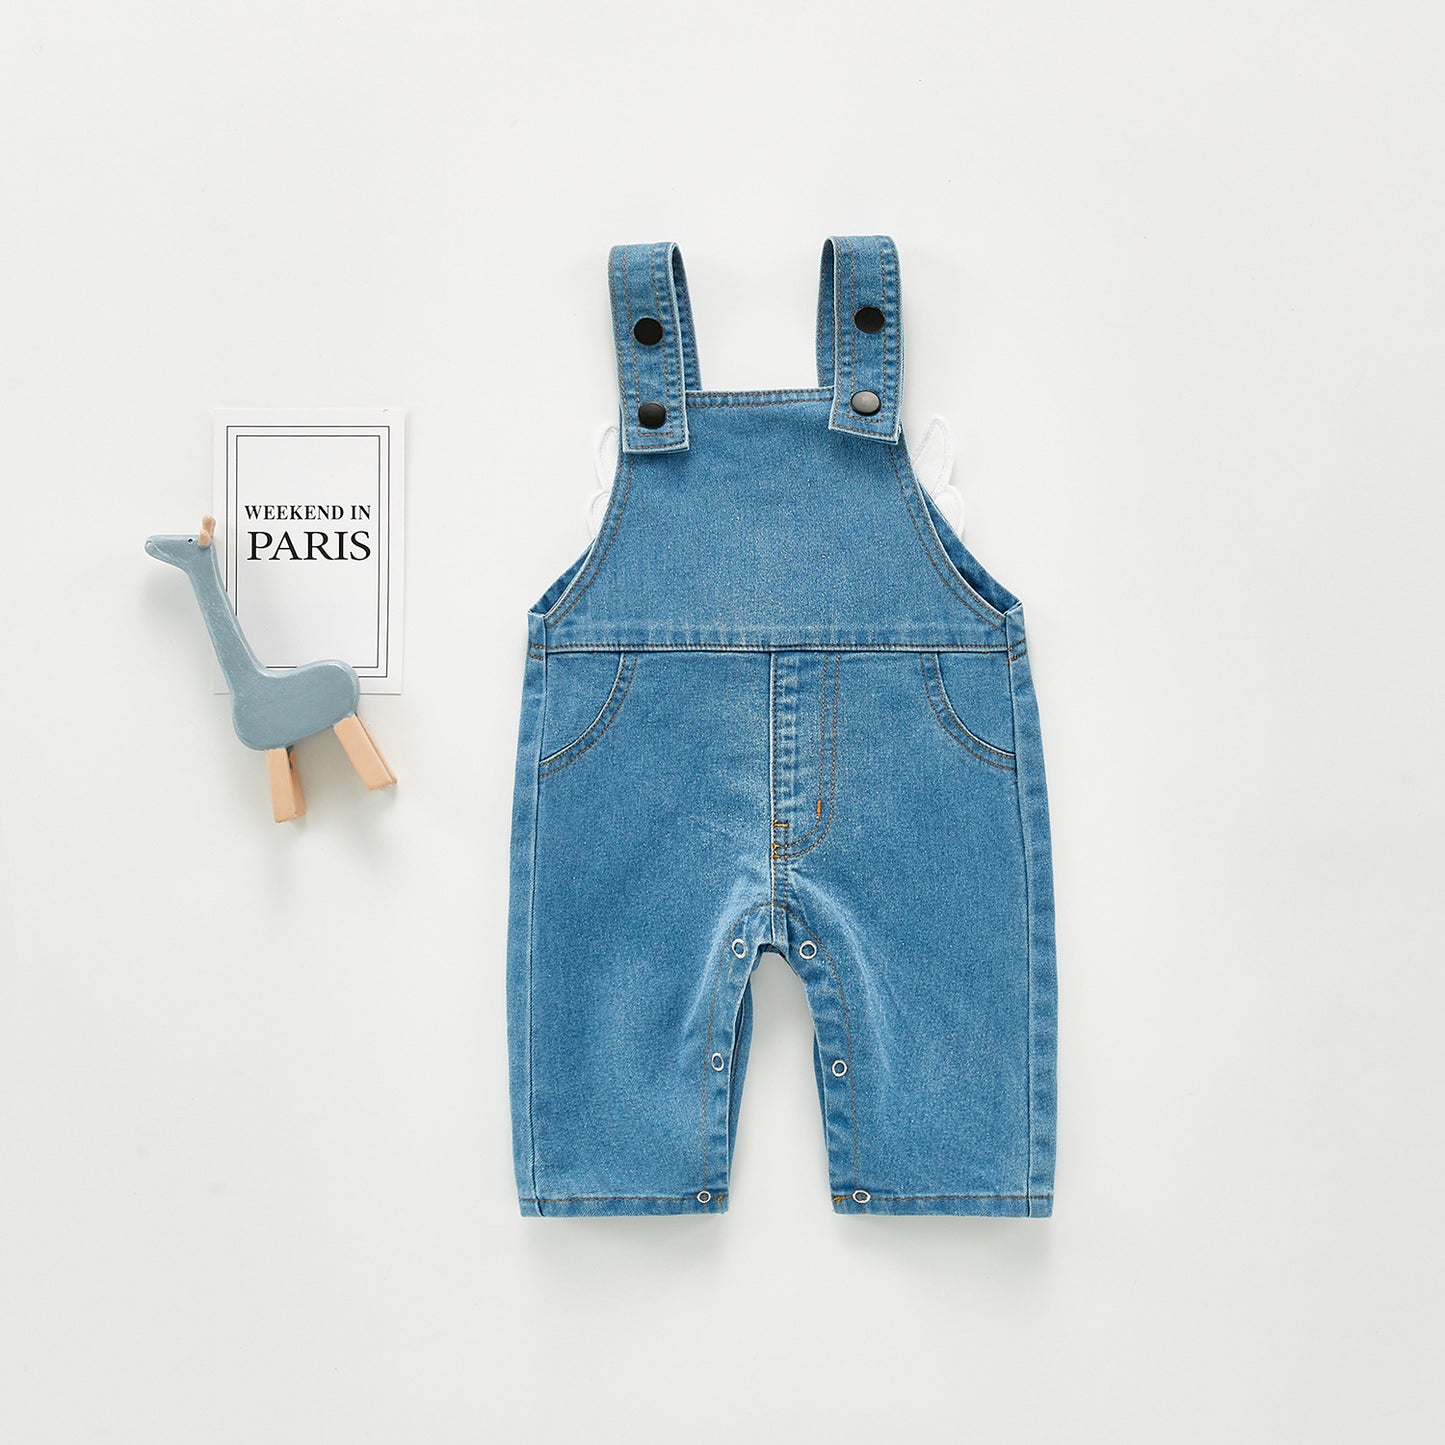 Denim baby unisex romper long overalls with adjustable straps and inseam snaps